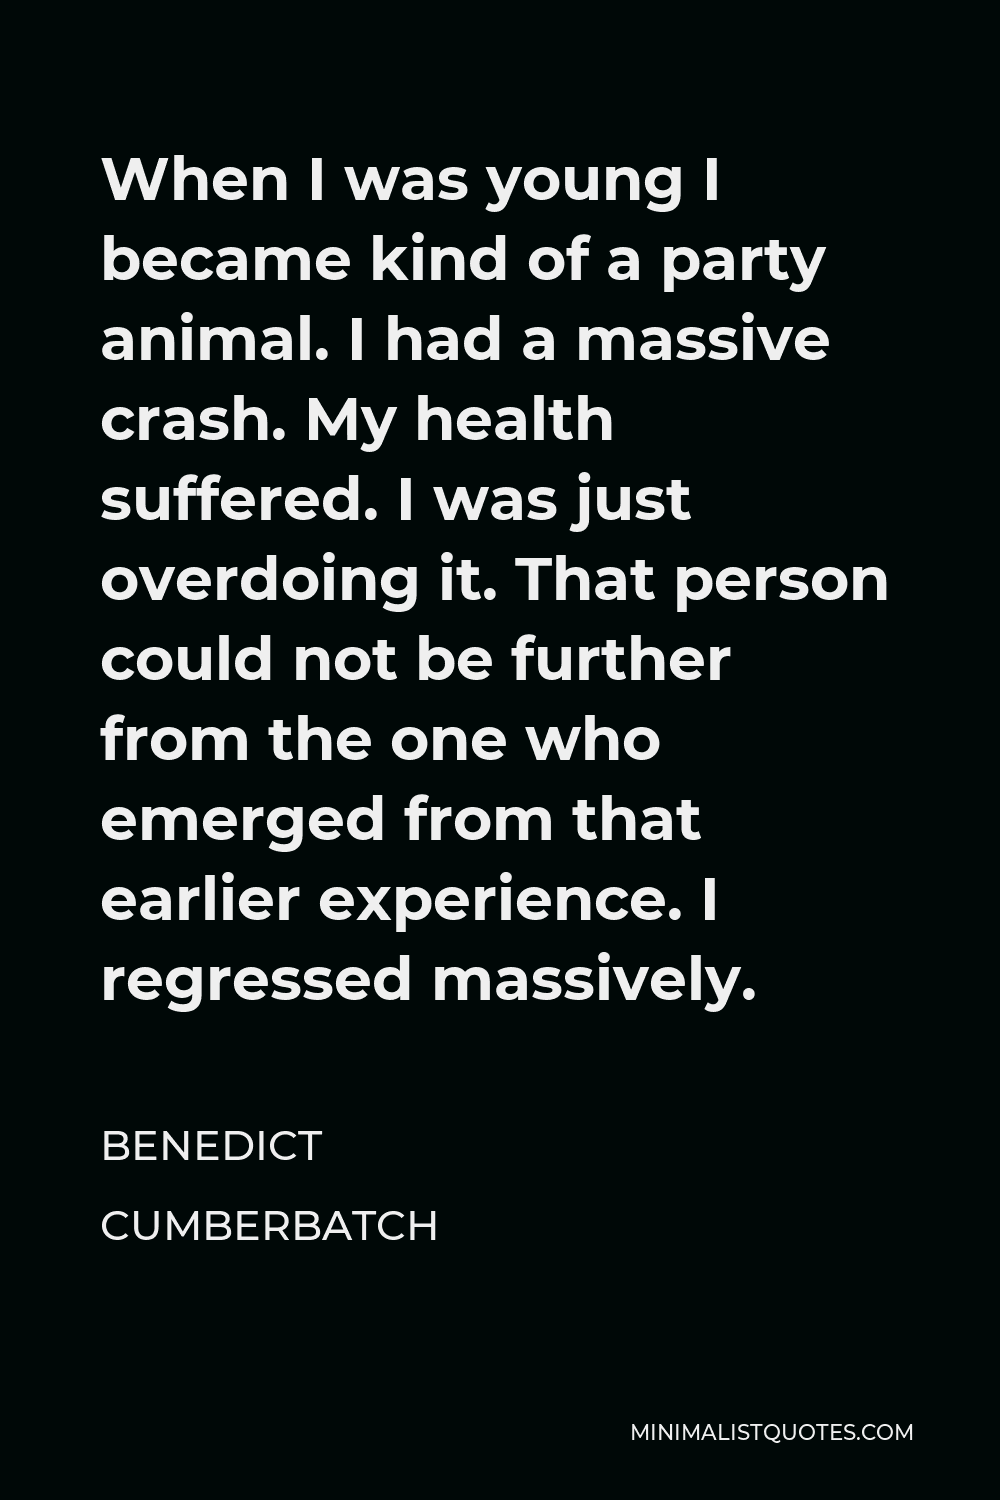 Benedict Cumberbatch Quote - When I was young I became kind of a party animal. I had a massive crash. My health suffered. I was just overdoing it. That person could not be further from the one who emerged from that earlier experience. I regressed massively.